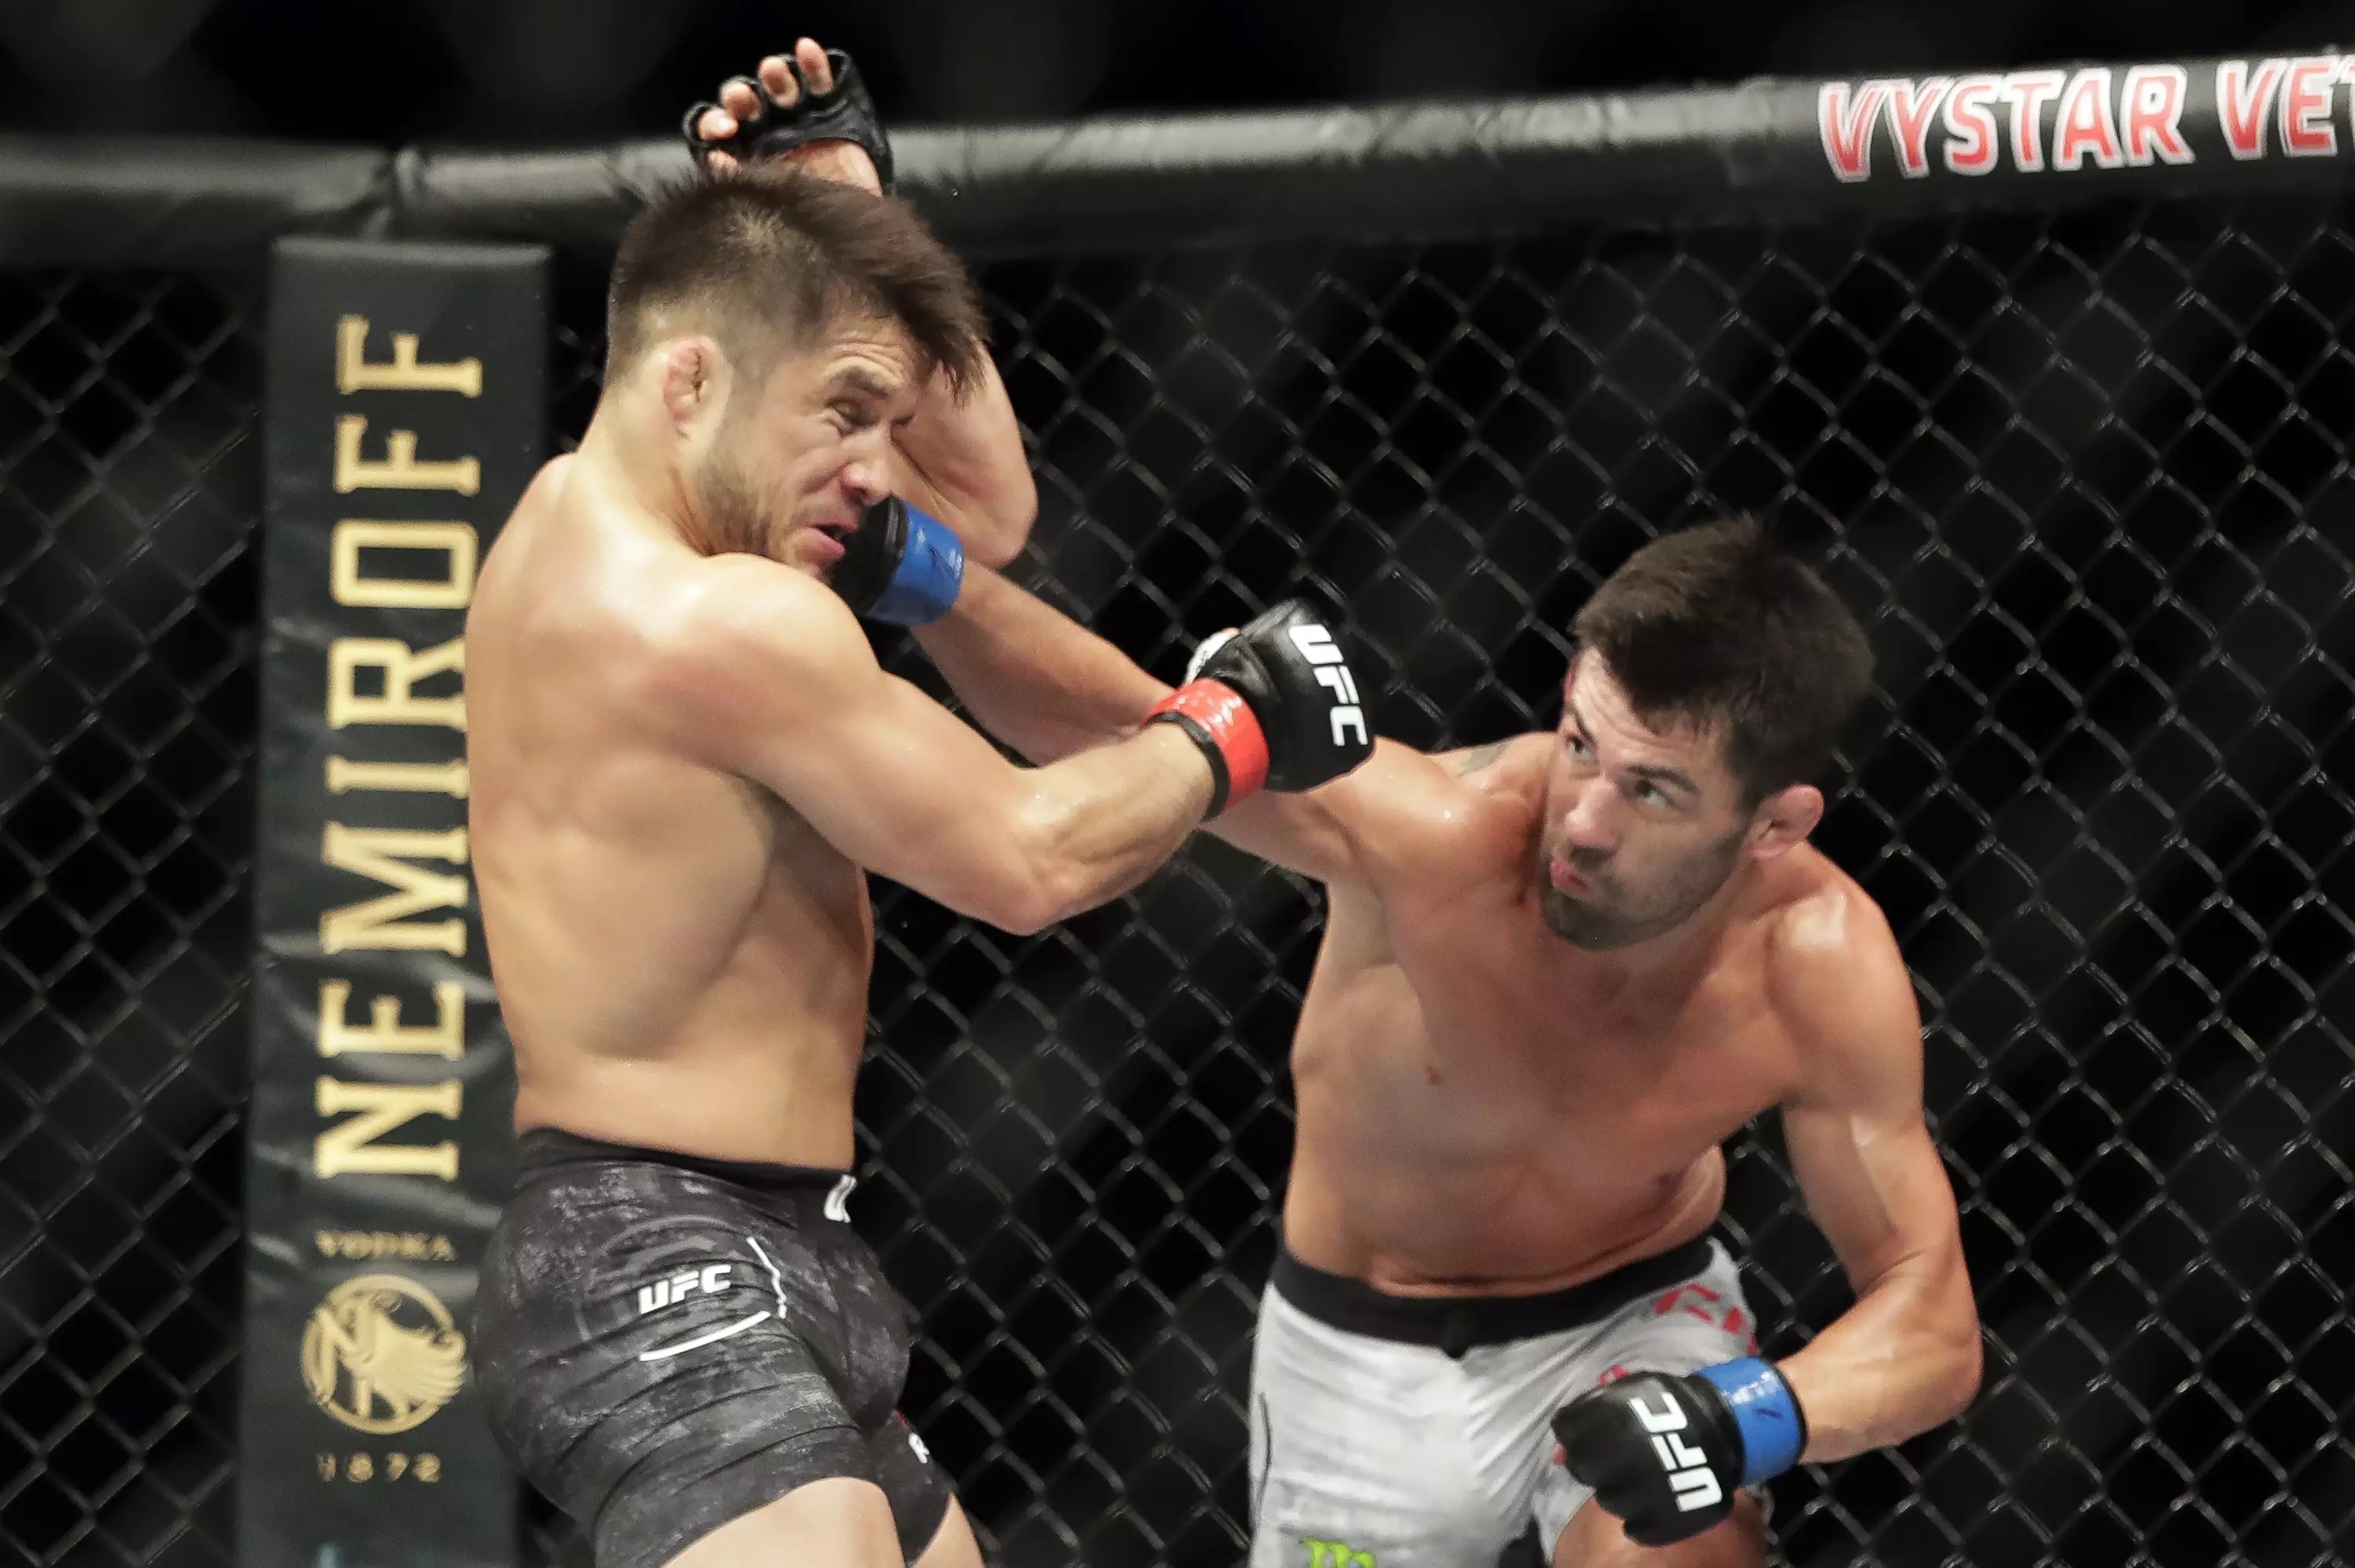 Henry Cejudo, left, takes a firm shot from challenger Dominick Cruz, right, on Saturday night. (Image